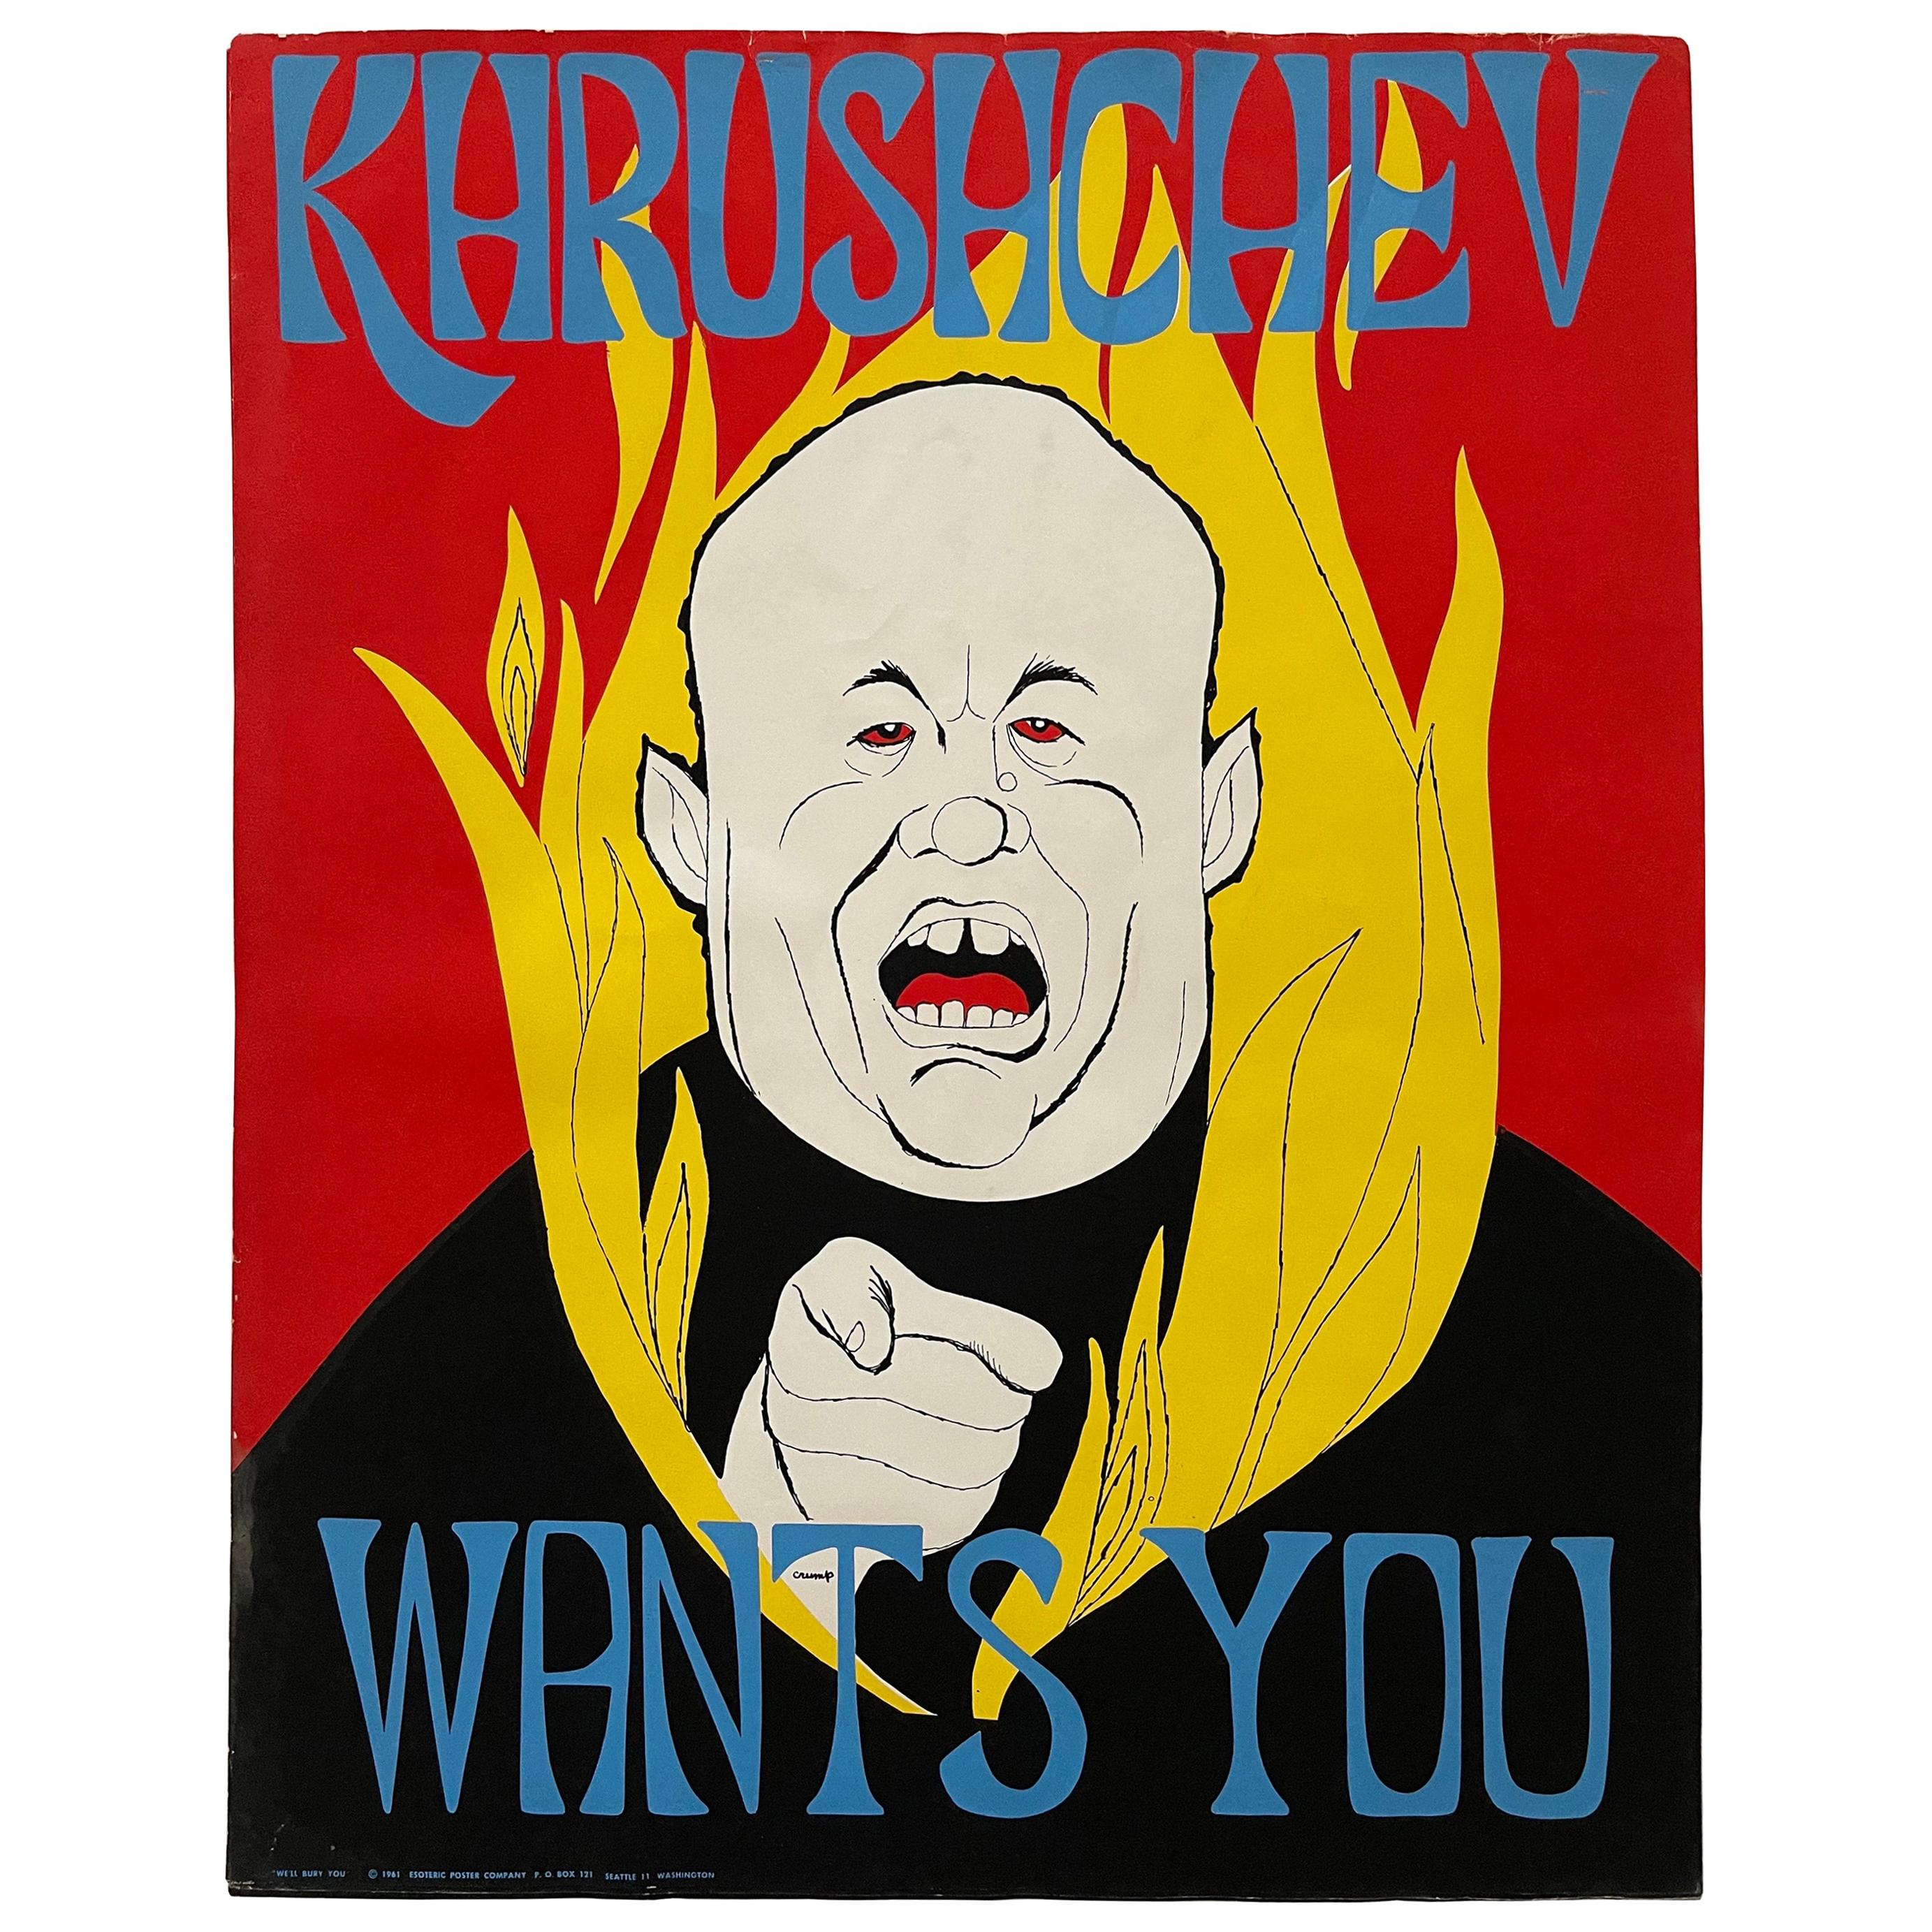 Vintage Cold War Propaganda Poster "Khrushchev Wants You" by Rolly Crump